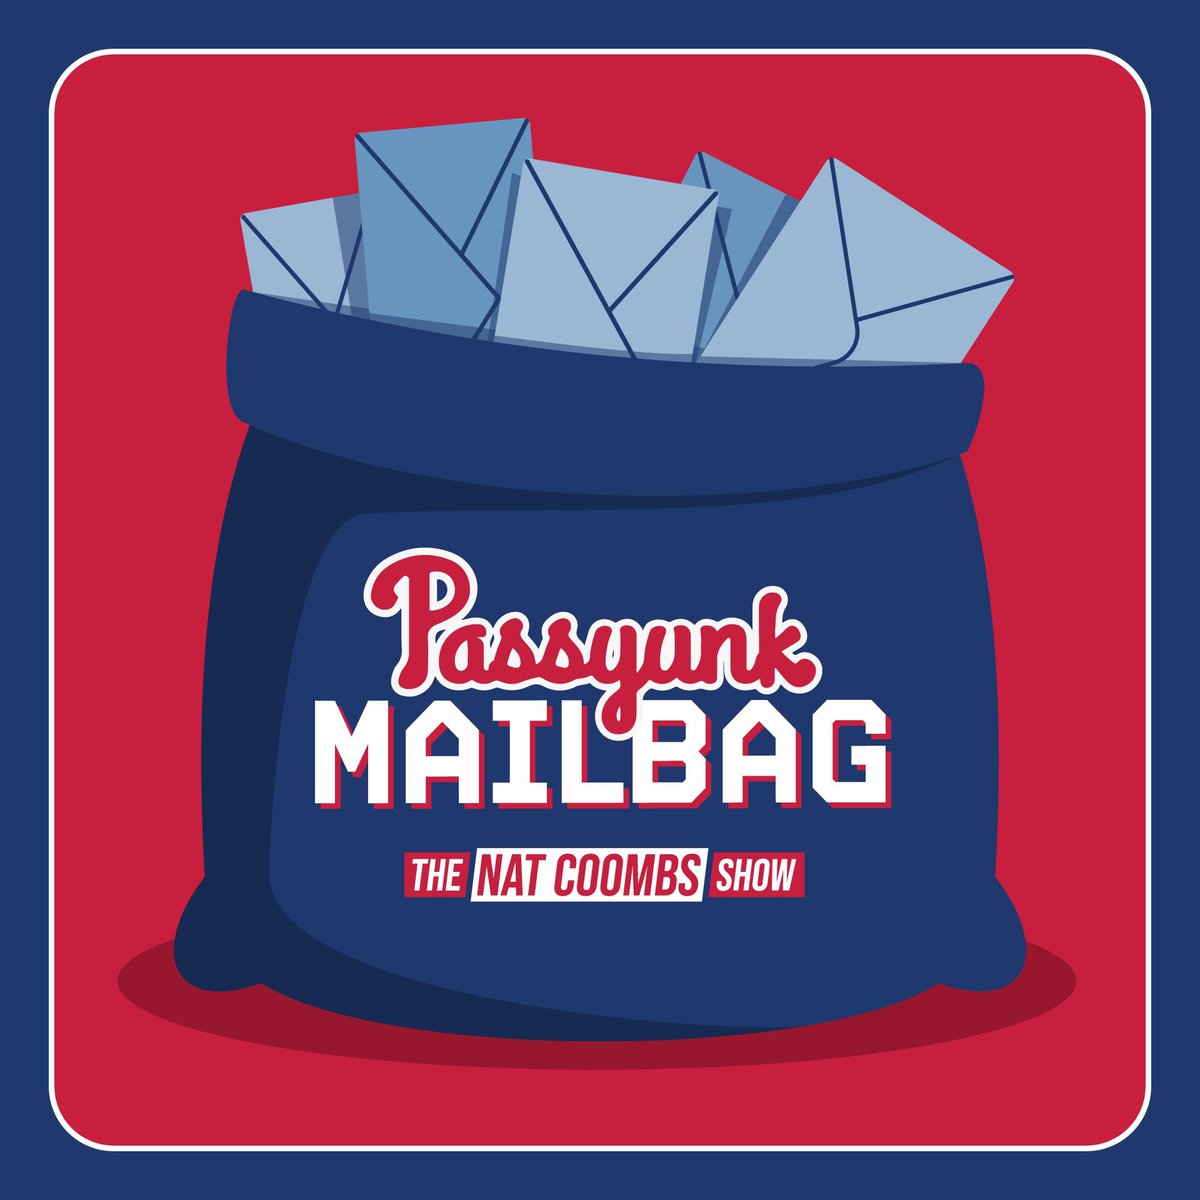 The @passyunkavenue mailbag is now OPEN!✉️ Leave your question below and @NatCoombs & special guest @asmir1 will try and get to it on the next episode👇 #NFL #NFLUK #Football #NewEnglandPatriots #Patriots #ForeverNE #SportsPodcast #Podcast #TheNCShow